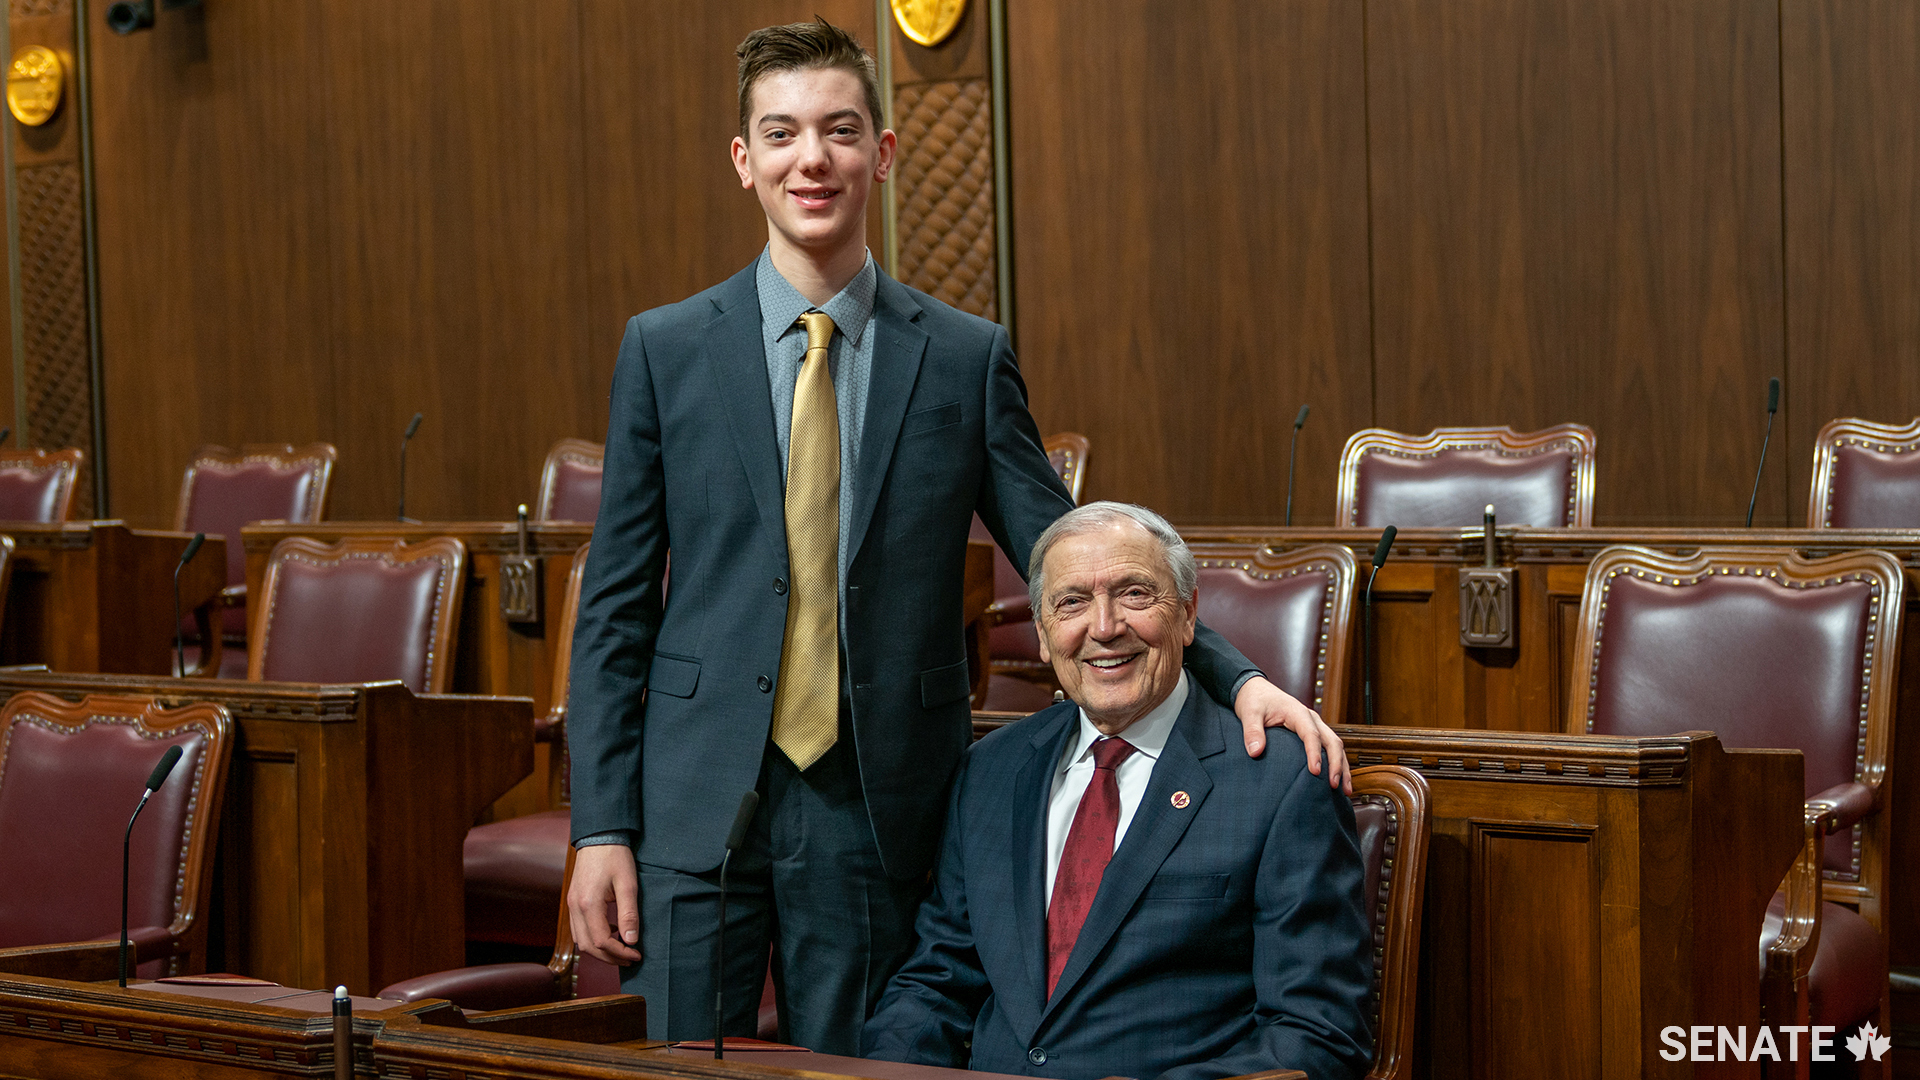 Senator Tkachuk and grandson Brady spend a quiet moment together in the Senate Chamber in 2020.